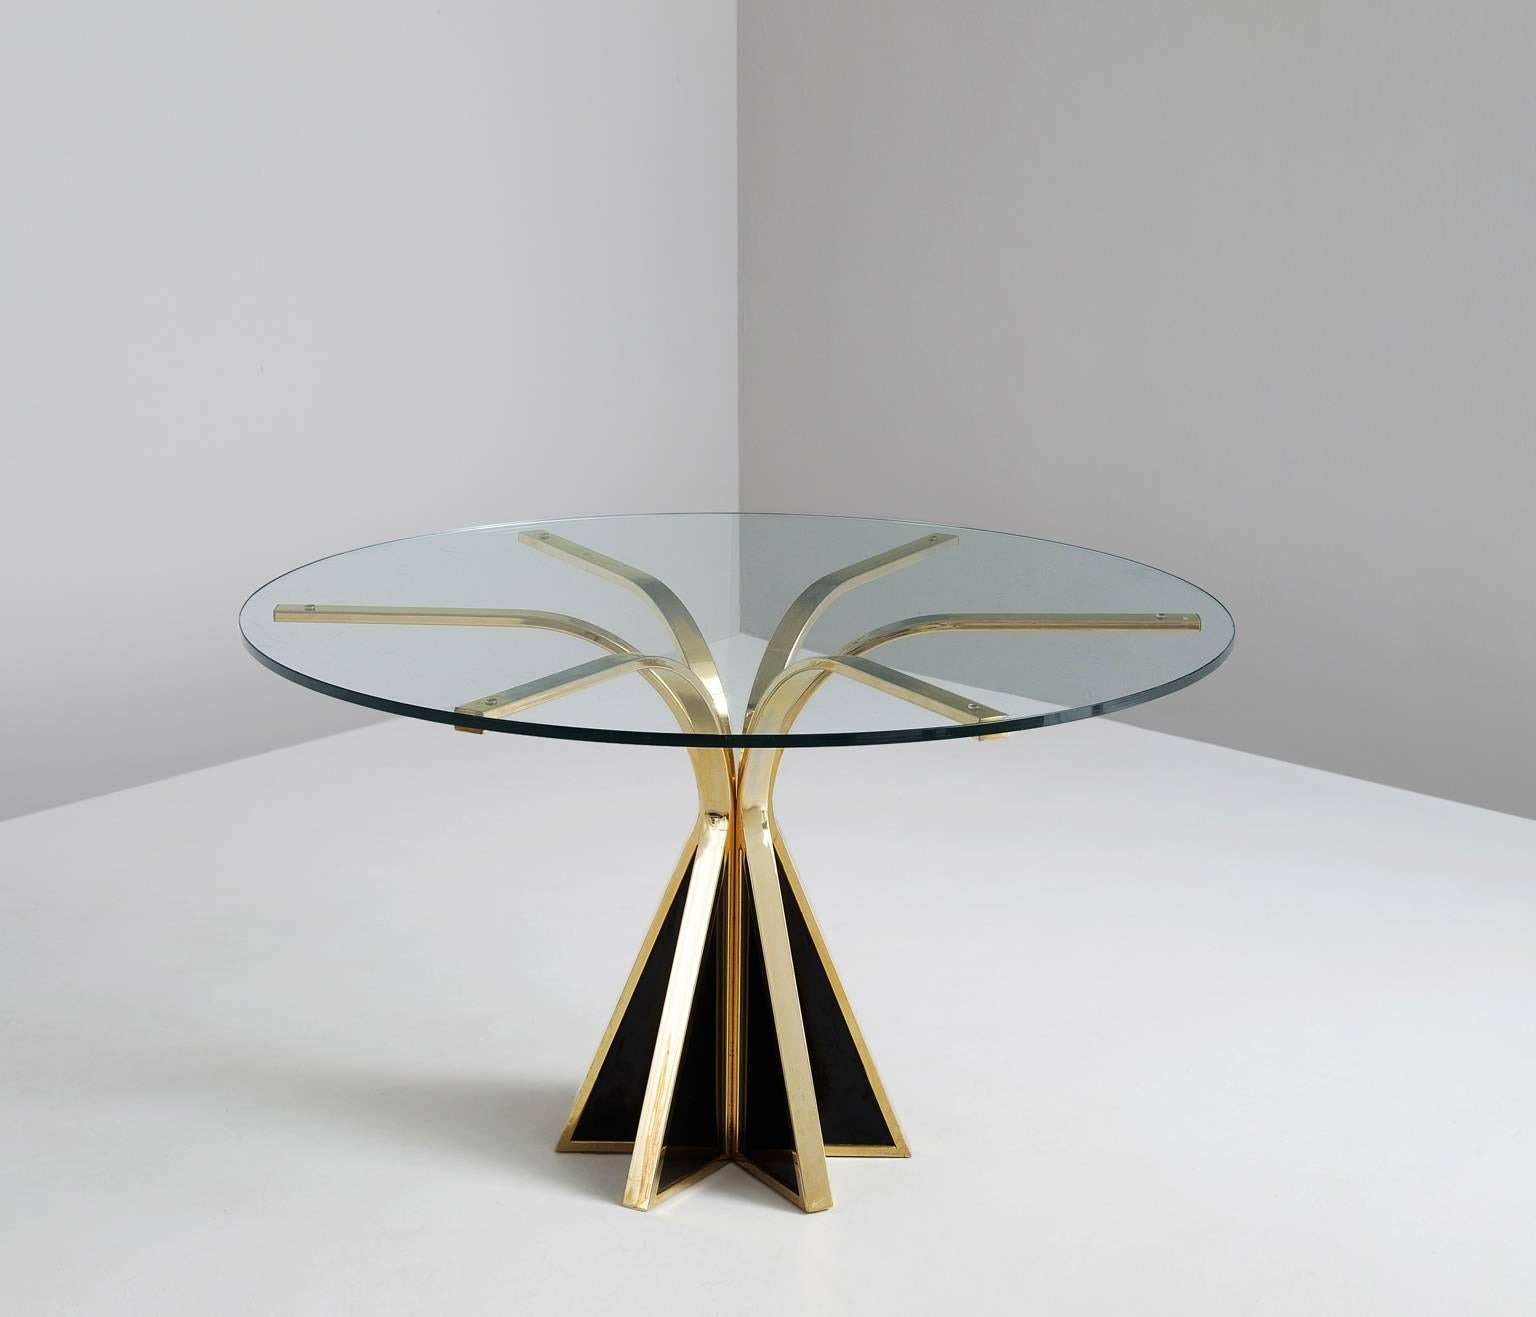 Round dining table in glass and brass, Italy, 1970s. 

Elegant dining table with round glass top. The top rests on a base of six brass straps, which fluently run into the legs of the table. This table show some nice contrasts; the clear glass and